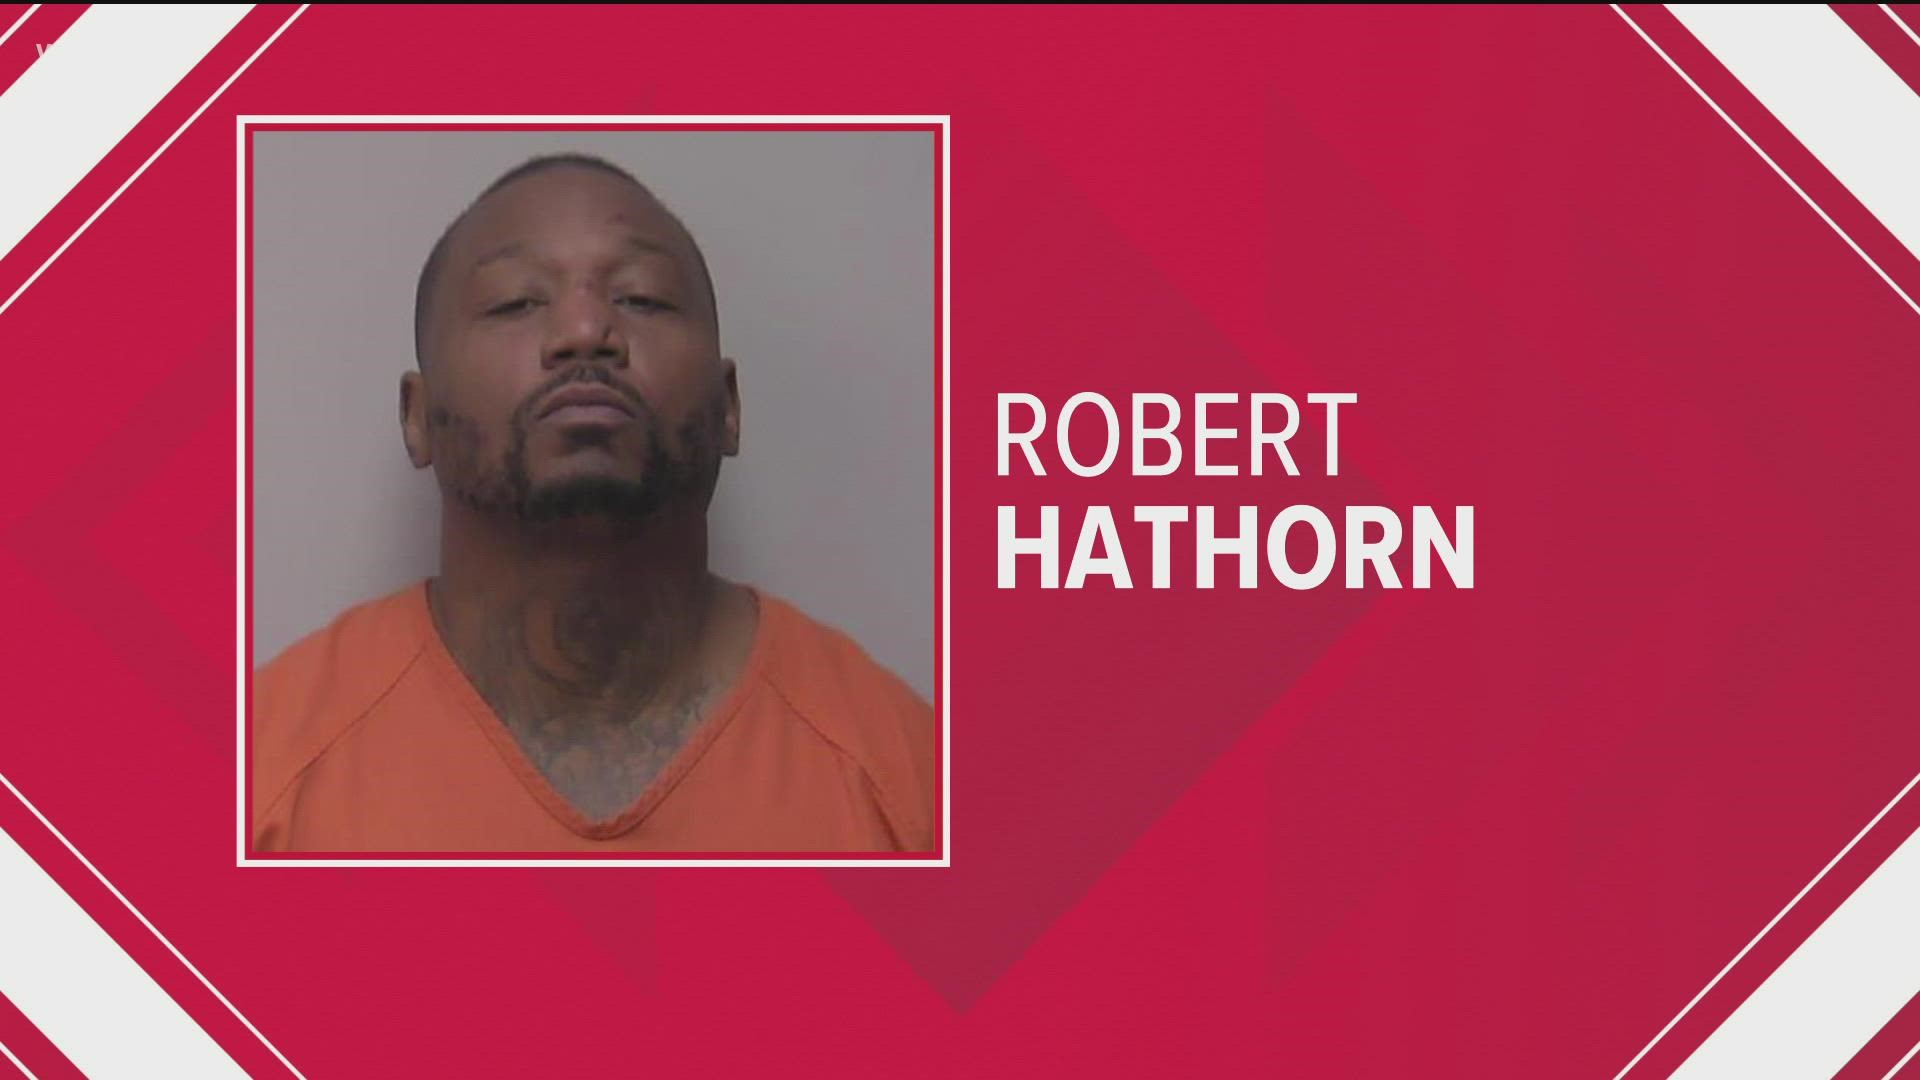 Robert Hathorn is being held without bail in Hancock County. One witness recalls watching a mass of law enforcement apprehend the fugitive near Findlay.